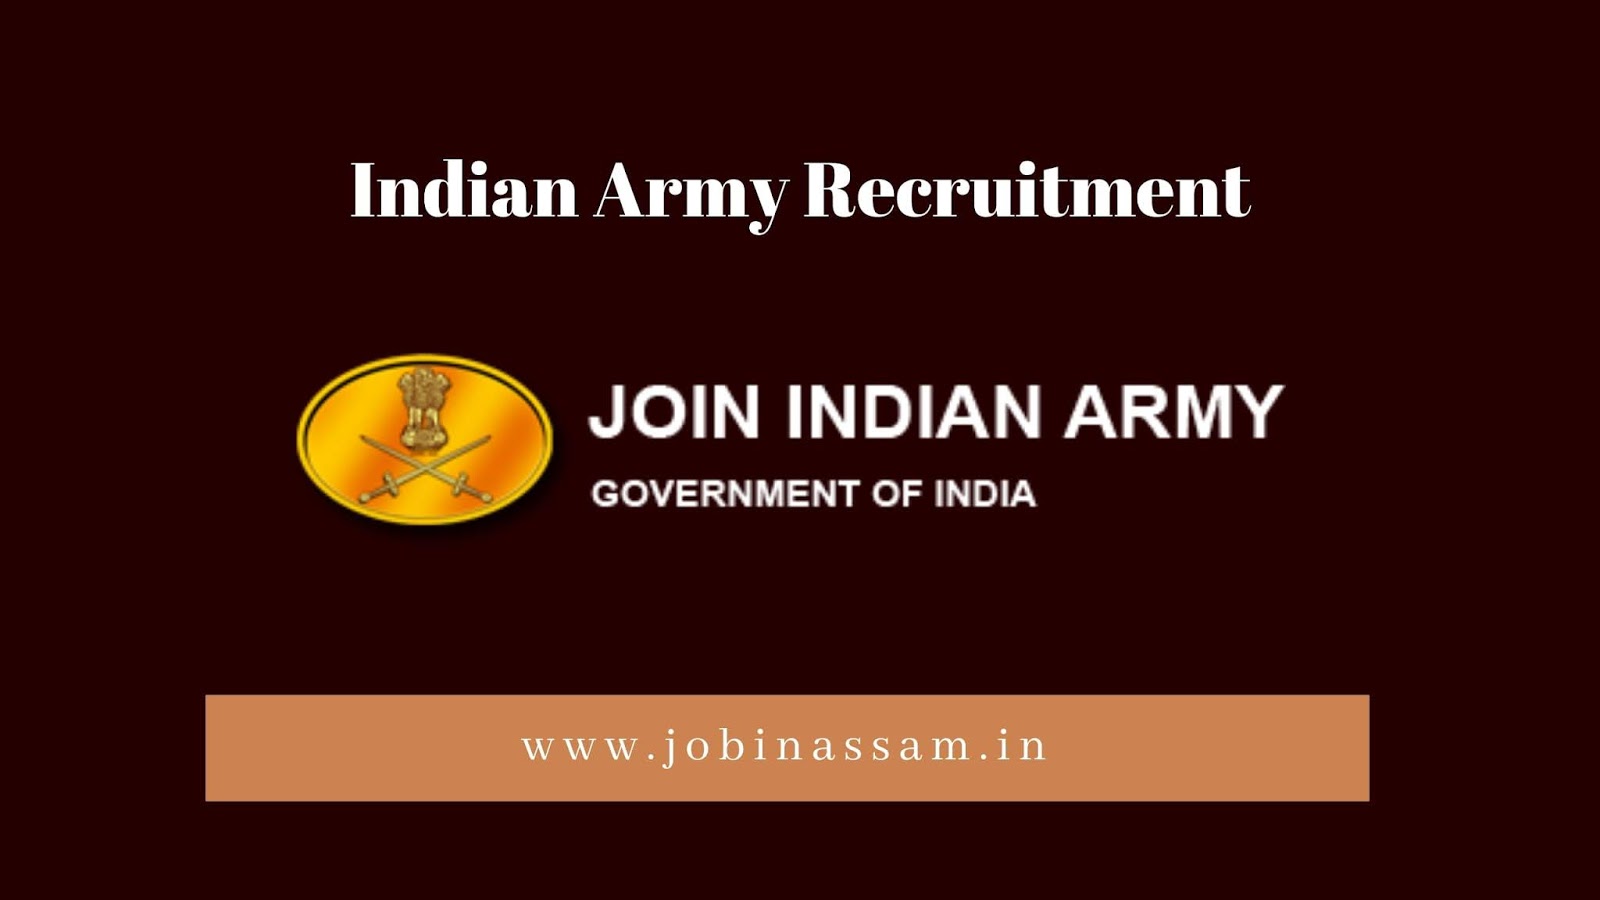 indian-army-recruitment-2019-posts-for-10-2-candidates-apply-now-job-in-assam-today-s